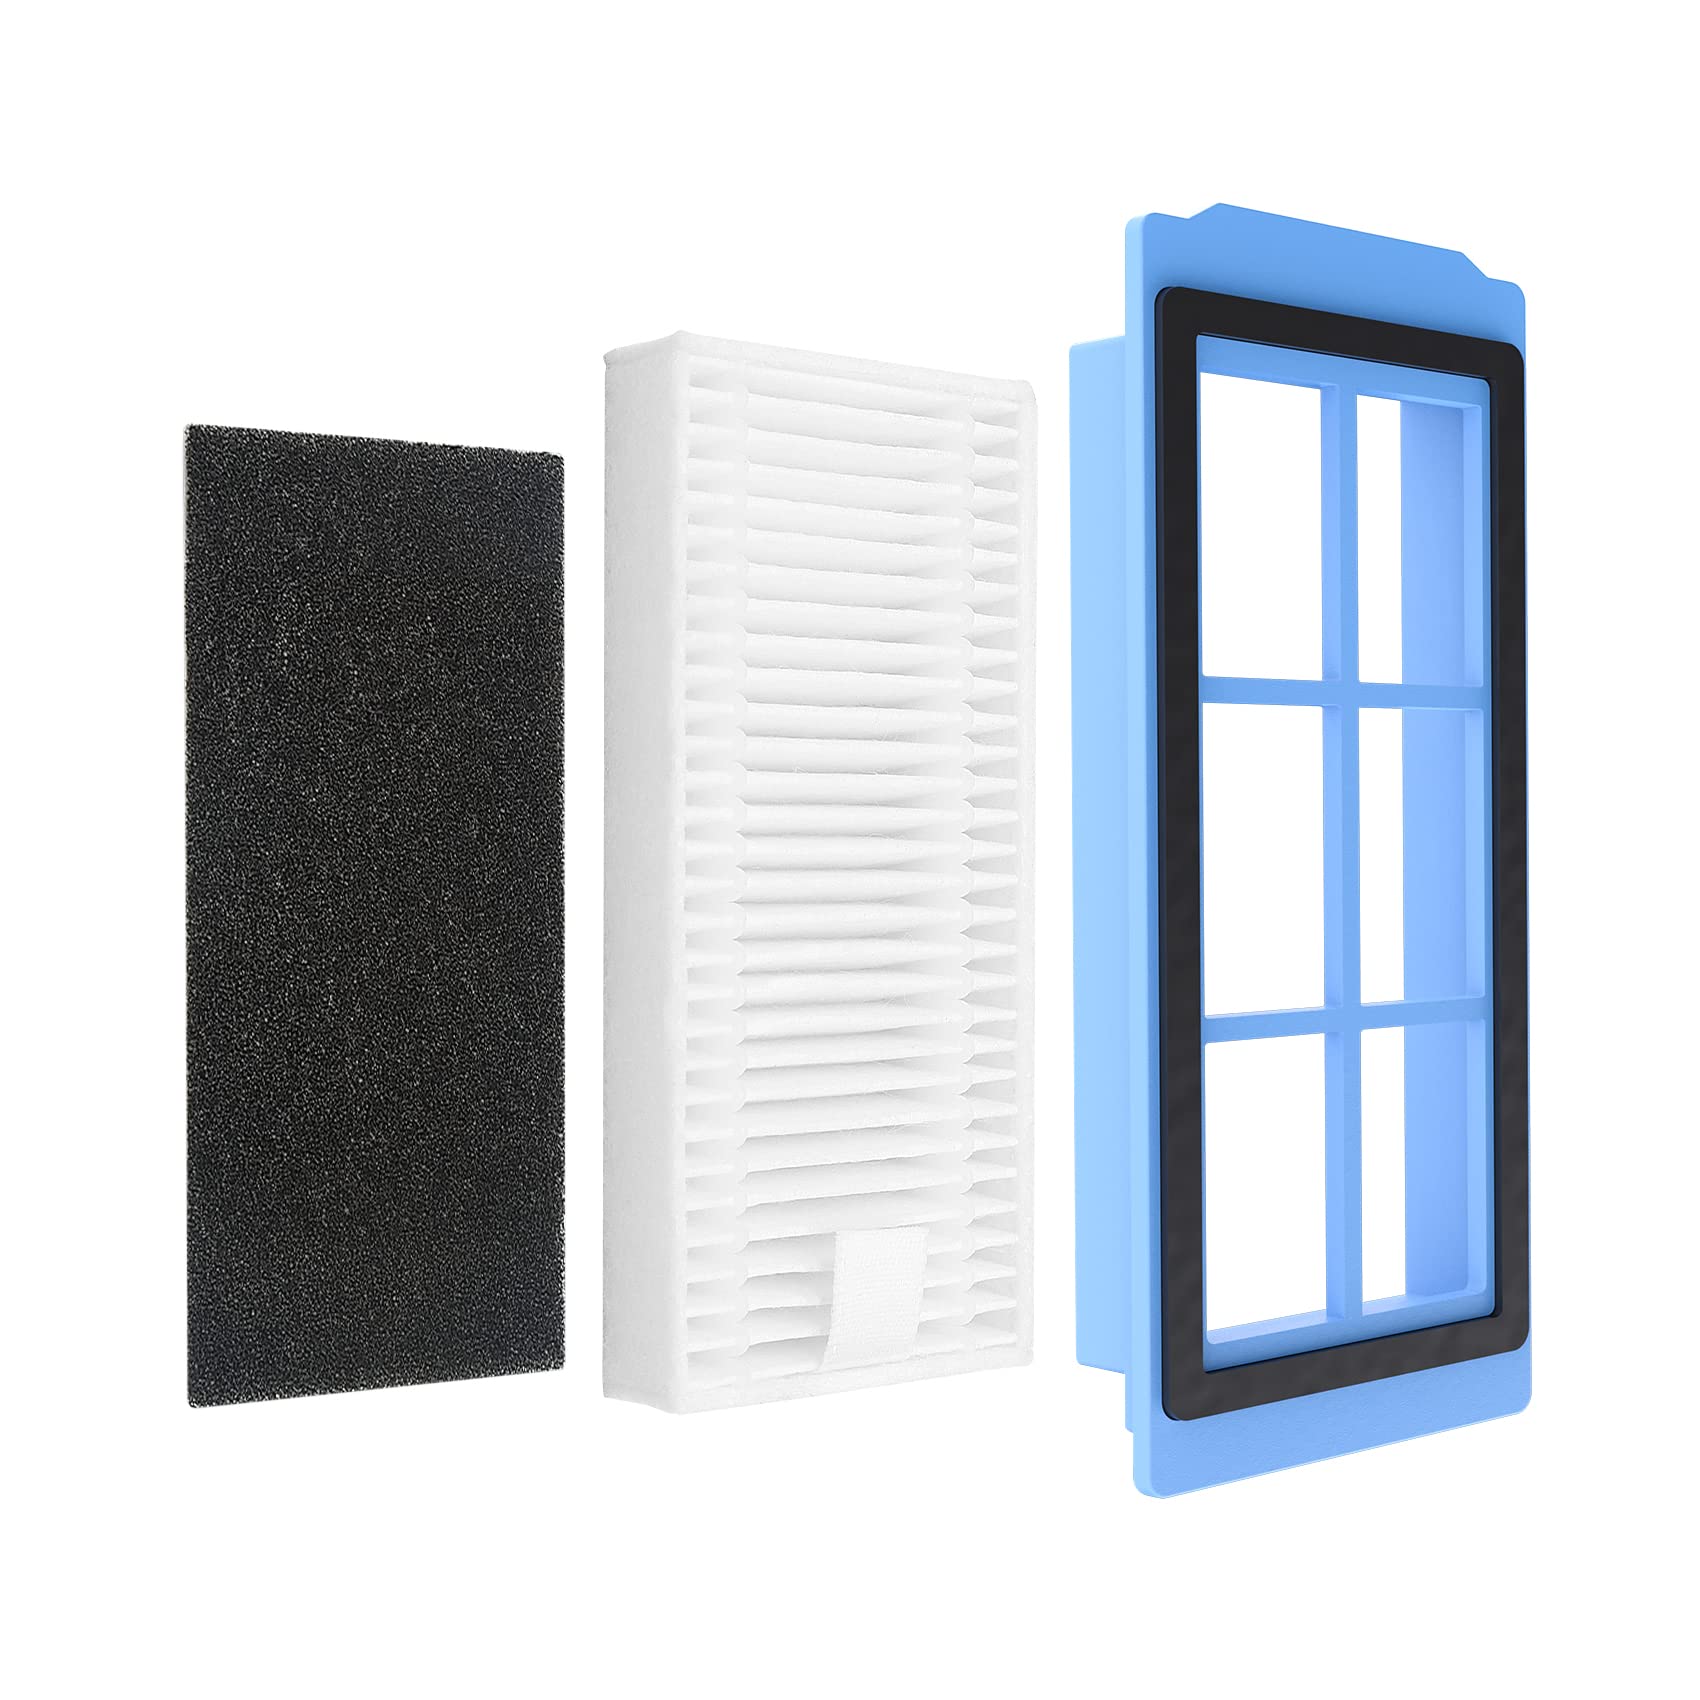 Thamtu G11 Replacement Filter Kits, 1 Filters and 1 Sponges Included